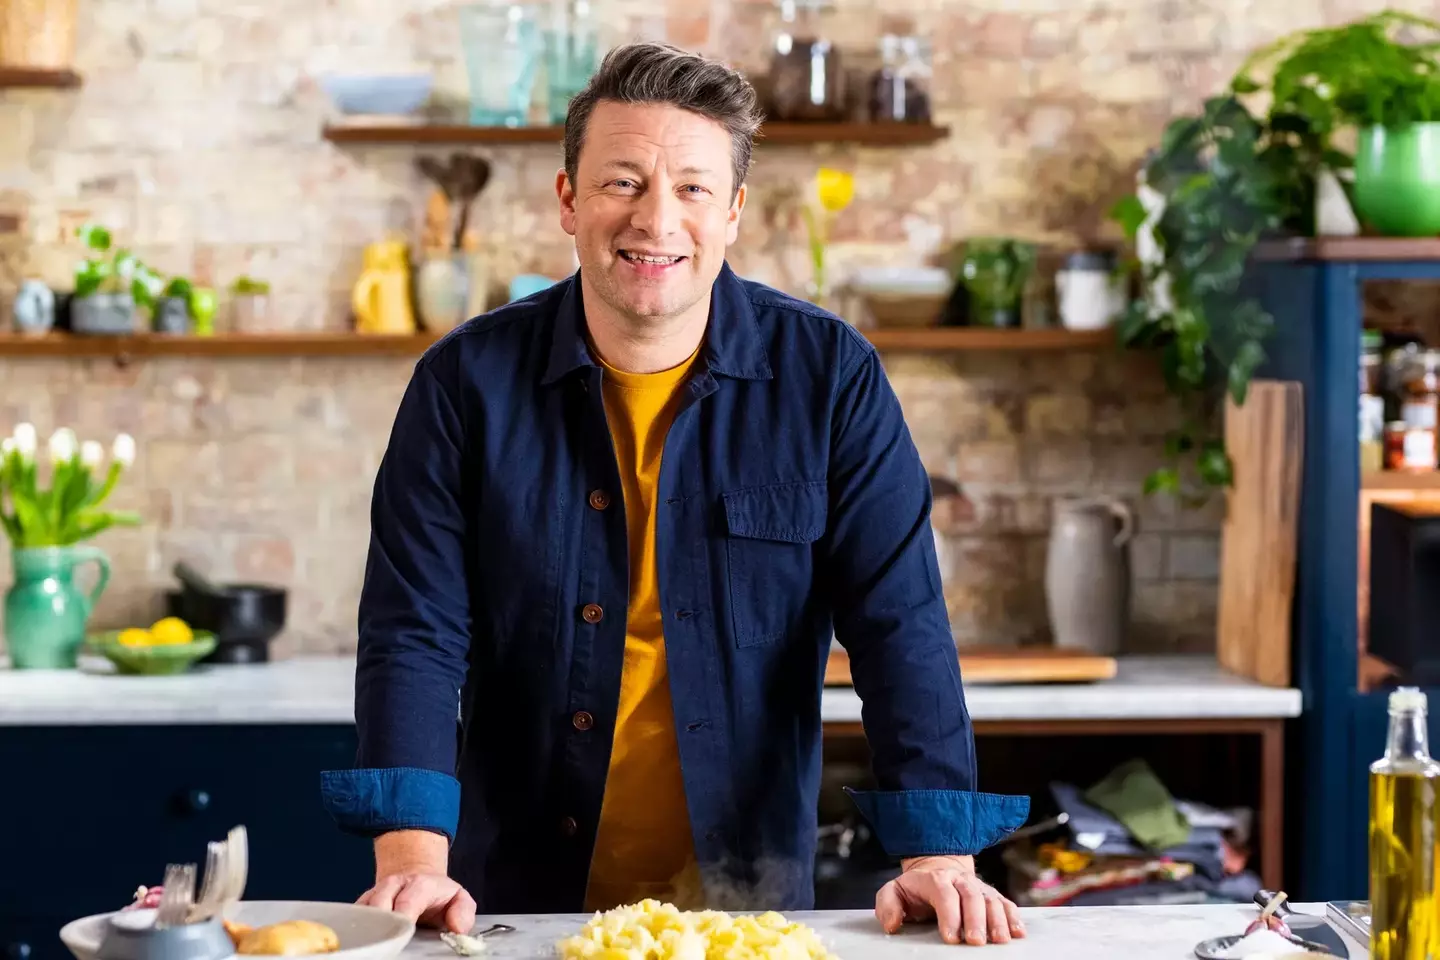 Jamie Oliver's new show started last night.